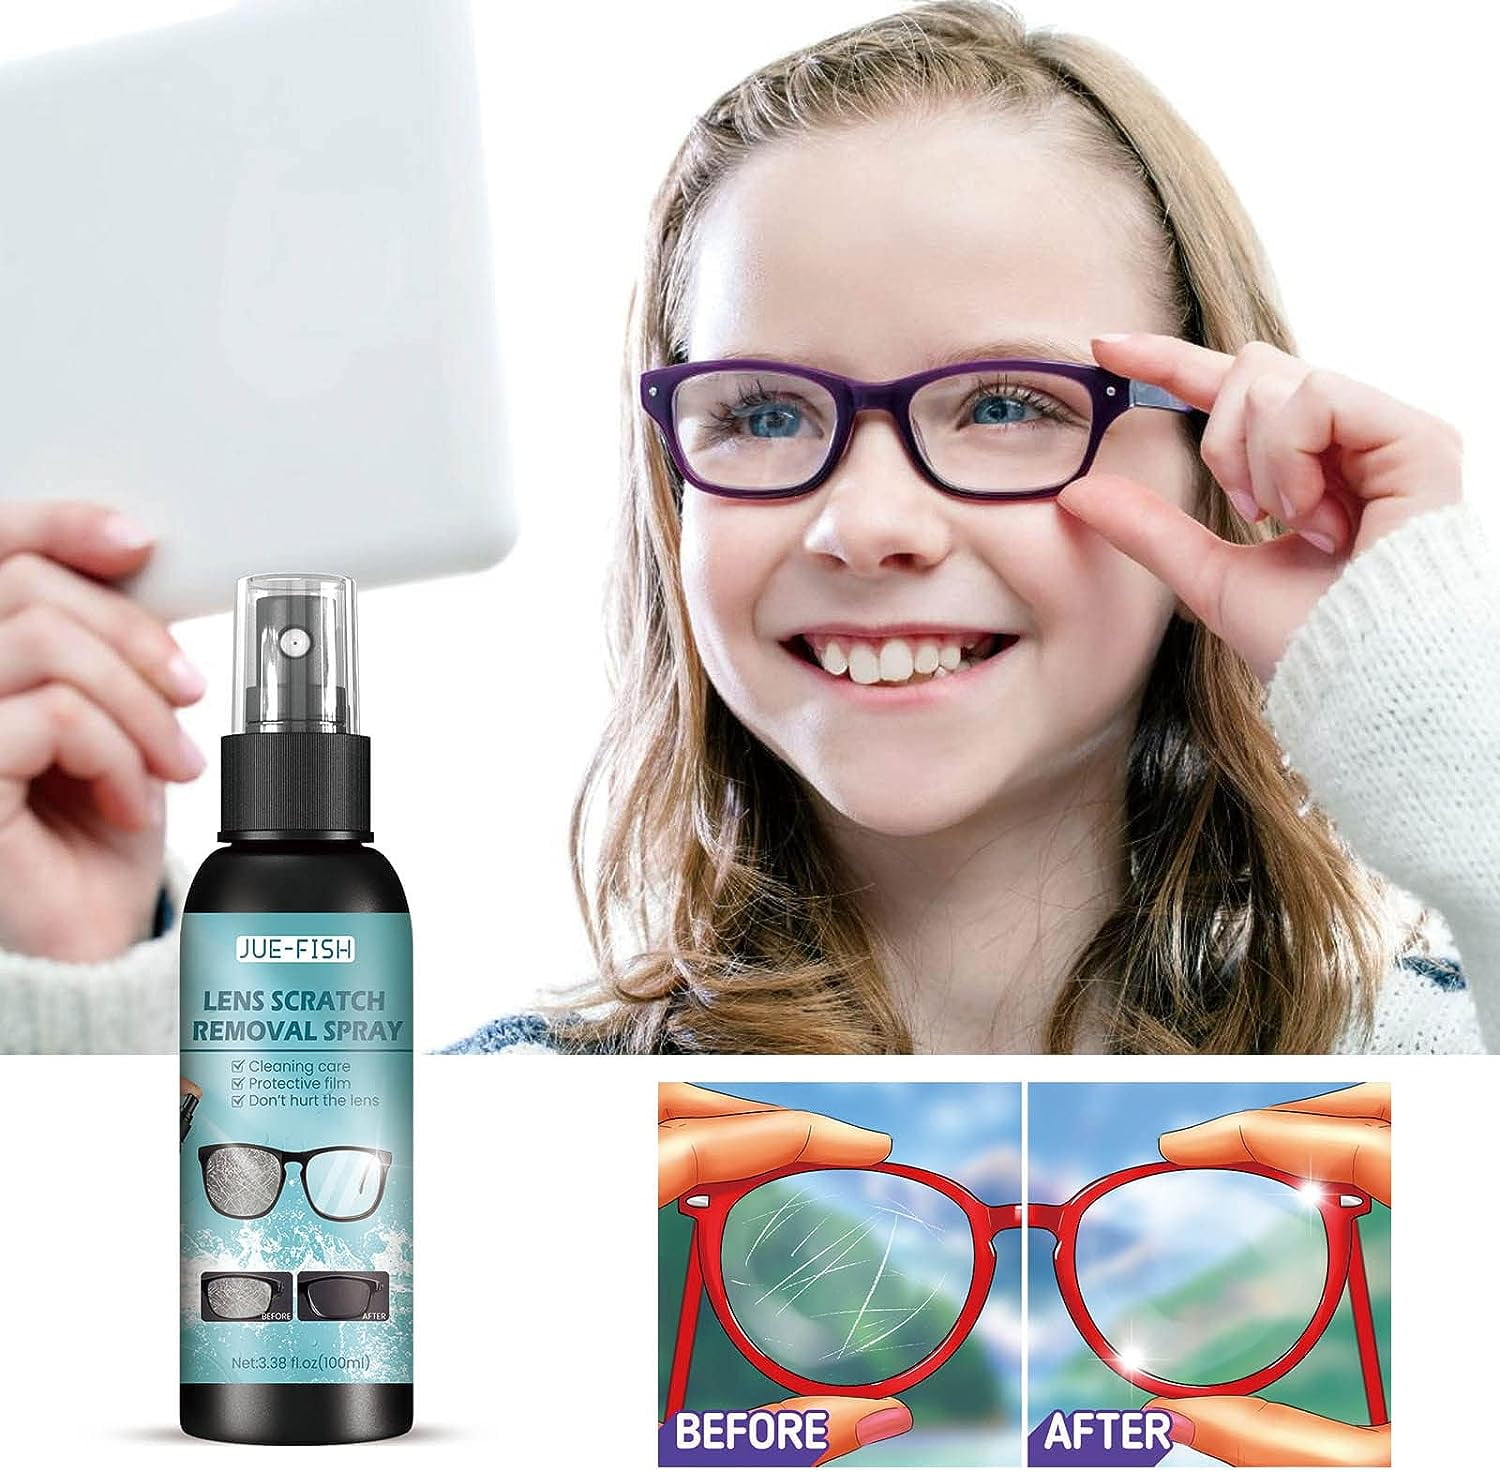  New Lens Scratch Removal Spray, Eyeglass Windshield Glass  Repair Liquid, Eyeglass Glass Scratch Repair Solution, Glasses Cleaner  Spray for Sunglasses Screen Cleaner Tools (3pc) : Health & Household